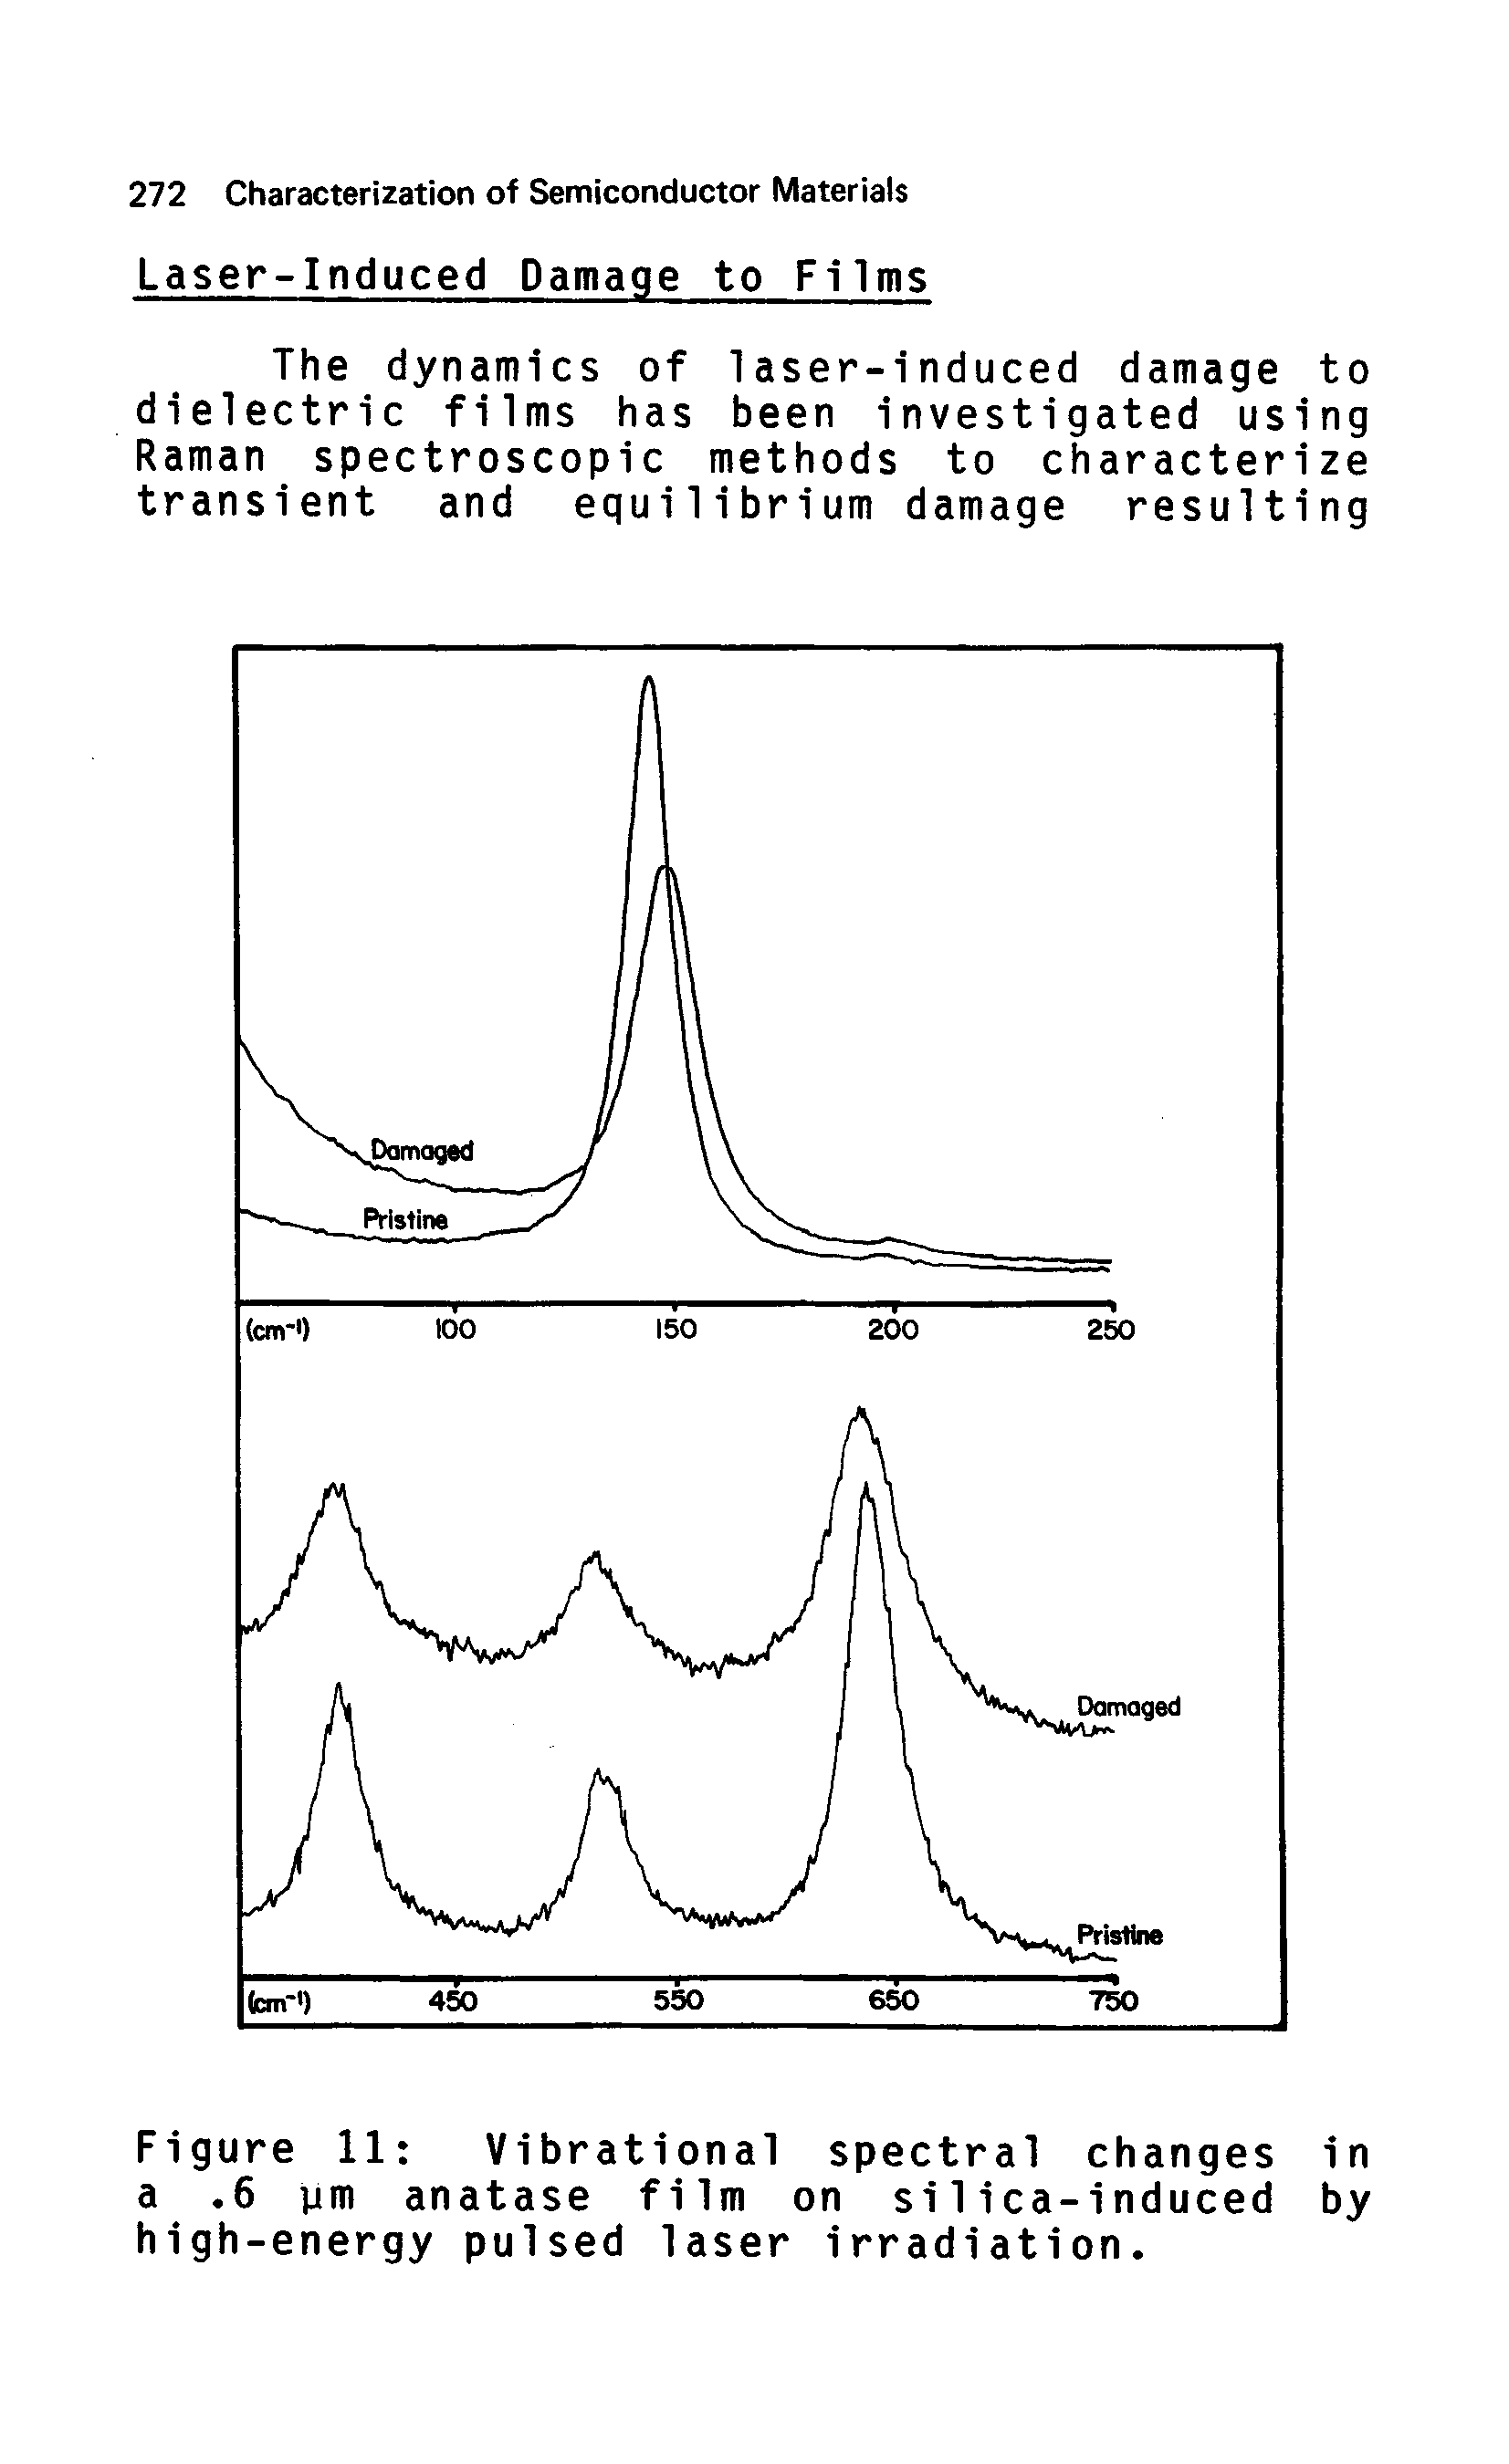 Figure 11 Vibrational spectral changes in a. 6 ym anatase film on silica-induced by high-energy pulsed laser irradiation.